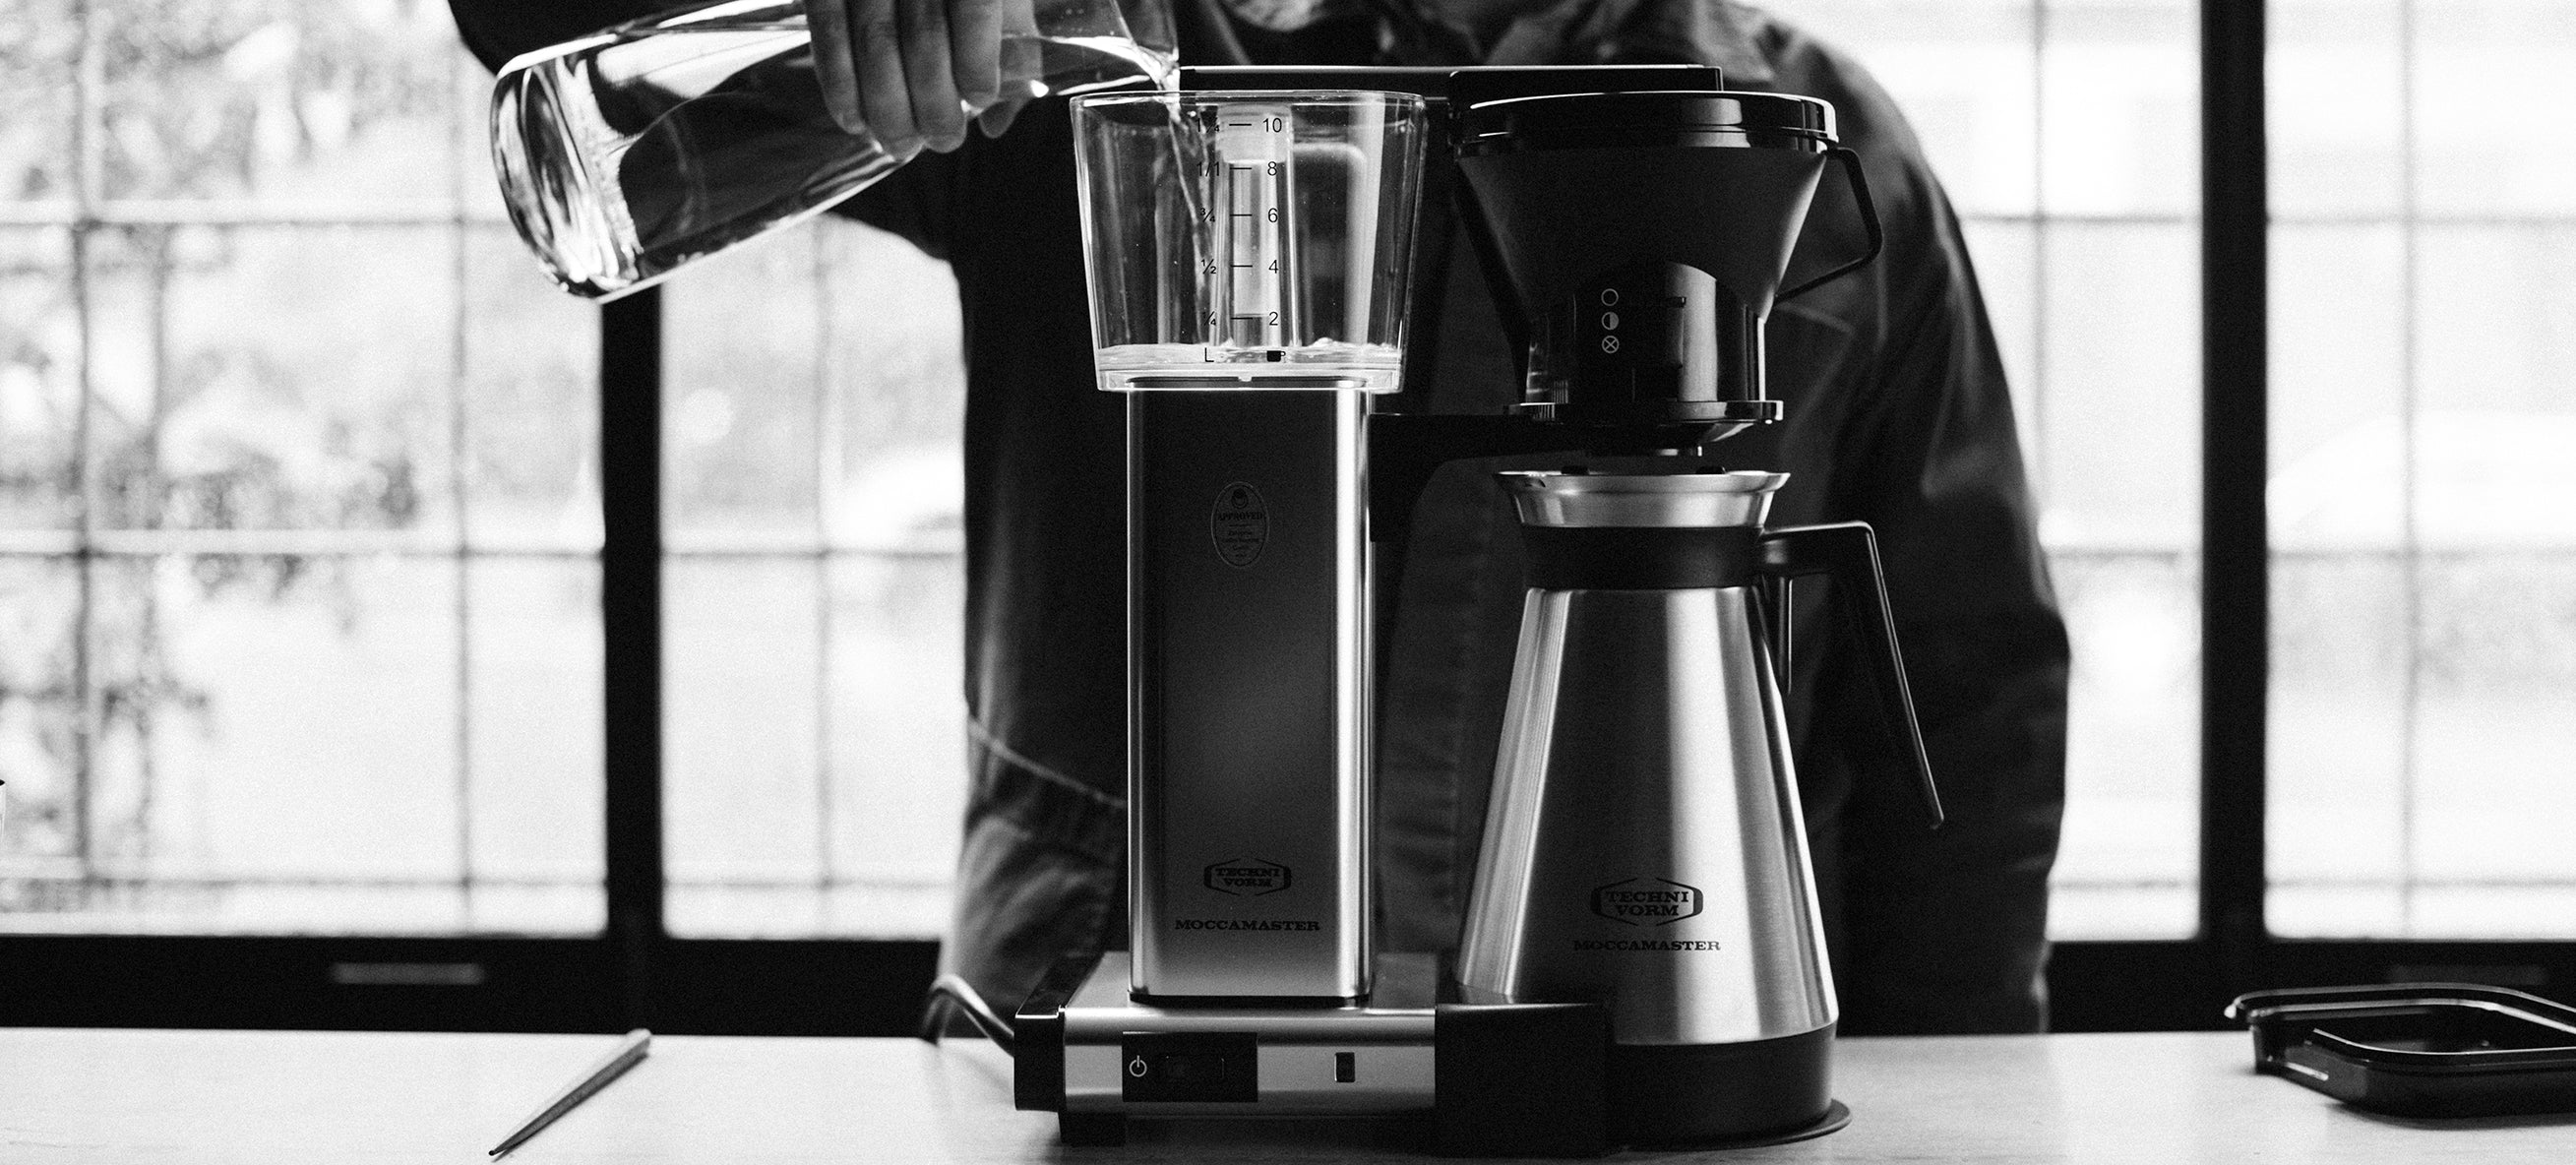 How to Brew Great Coffee on Moccamaster 